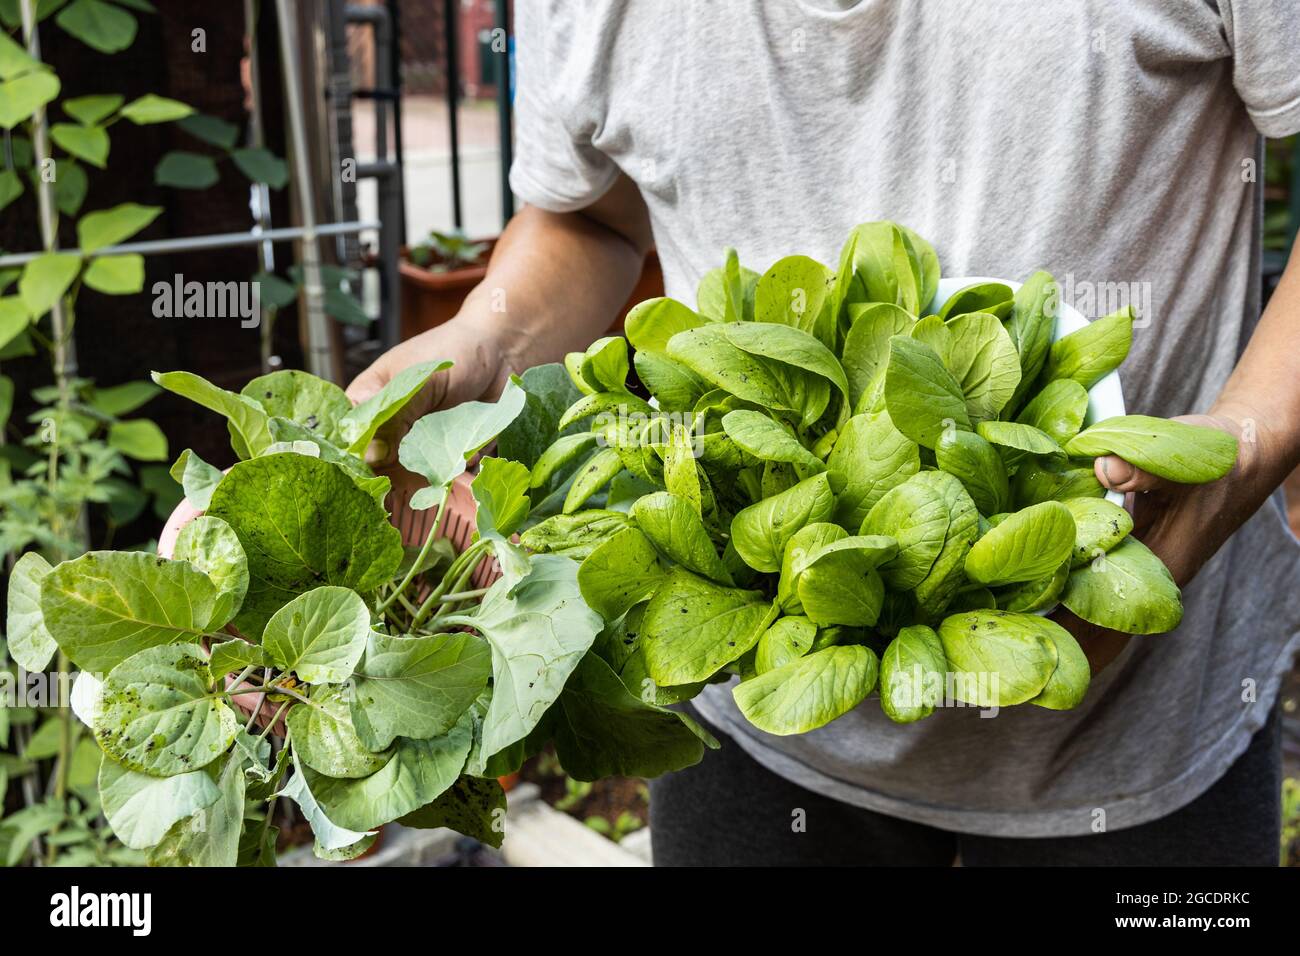 Person showing organic vegetables harvested from home garden. Grown during covid-19 lockdown to pass time Stock Photo